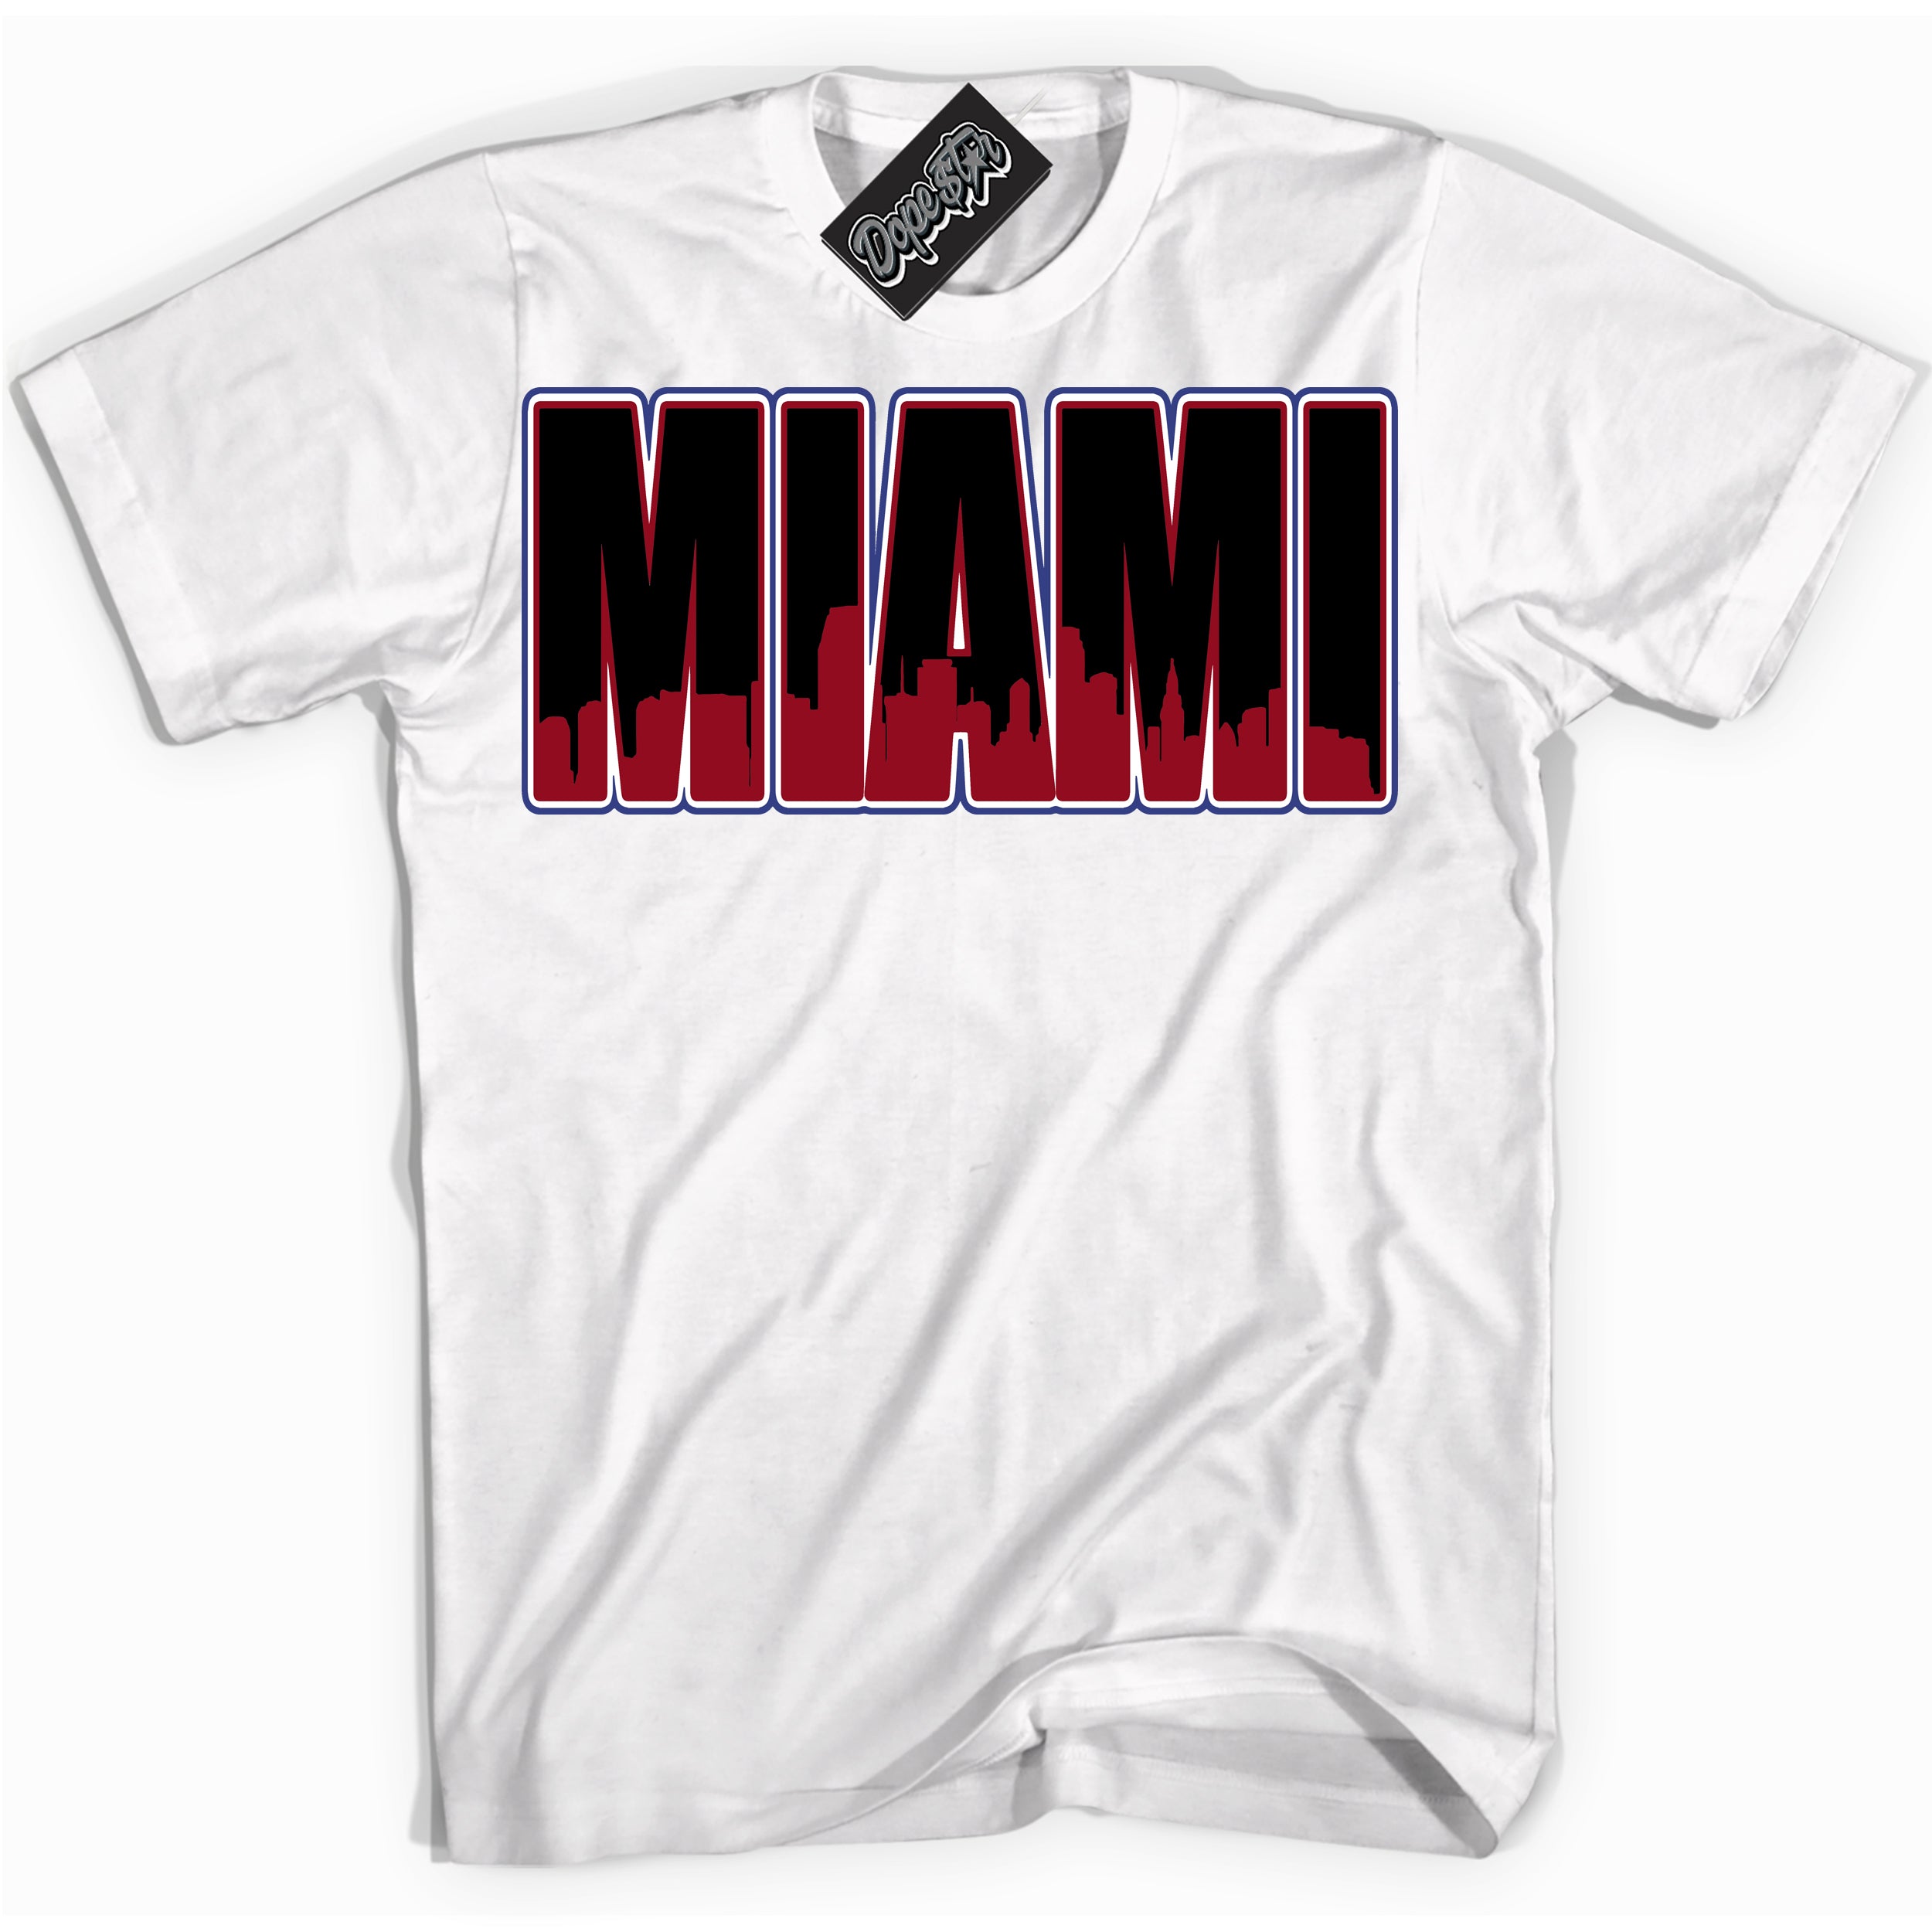 Cool White Shirt with “ Miami ” design that perfectly matches Playoffs 8s Sneakers.